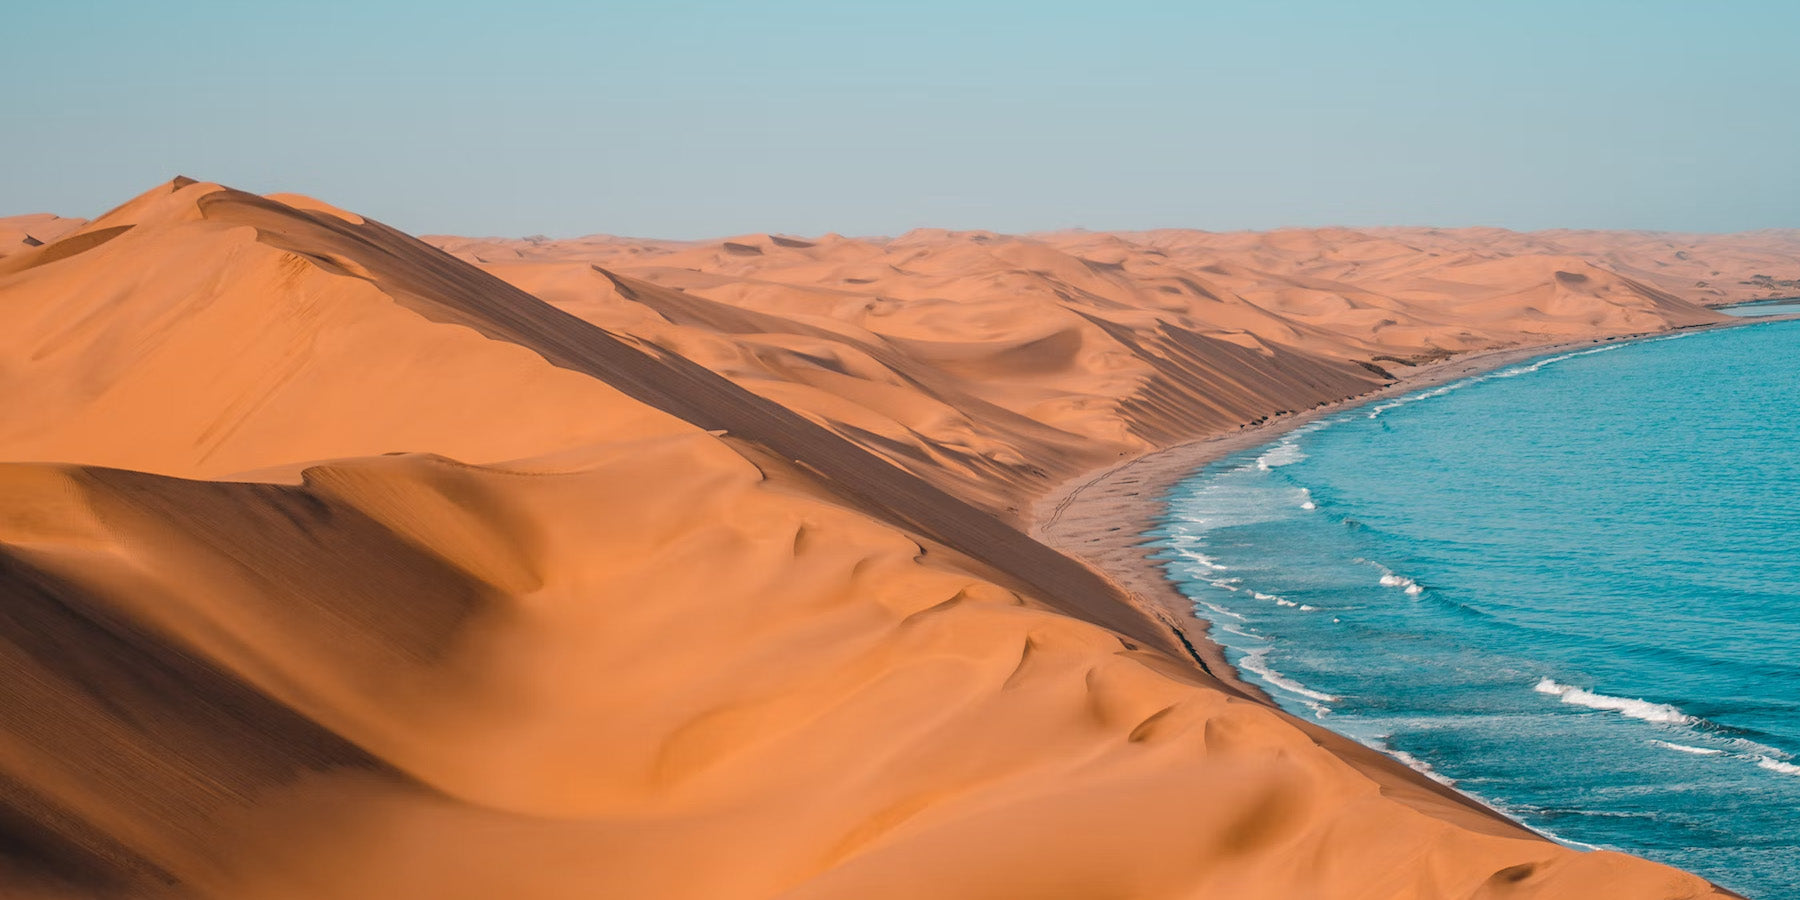 Desert with sand dunes and blue ocean